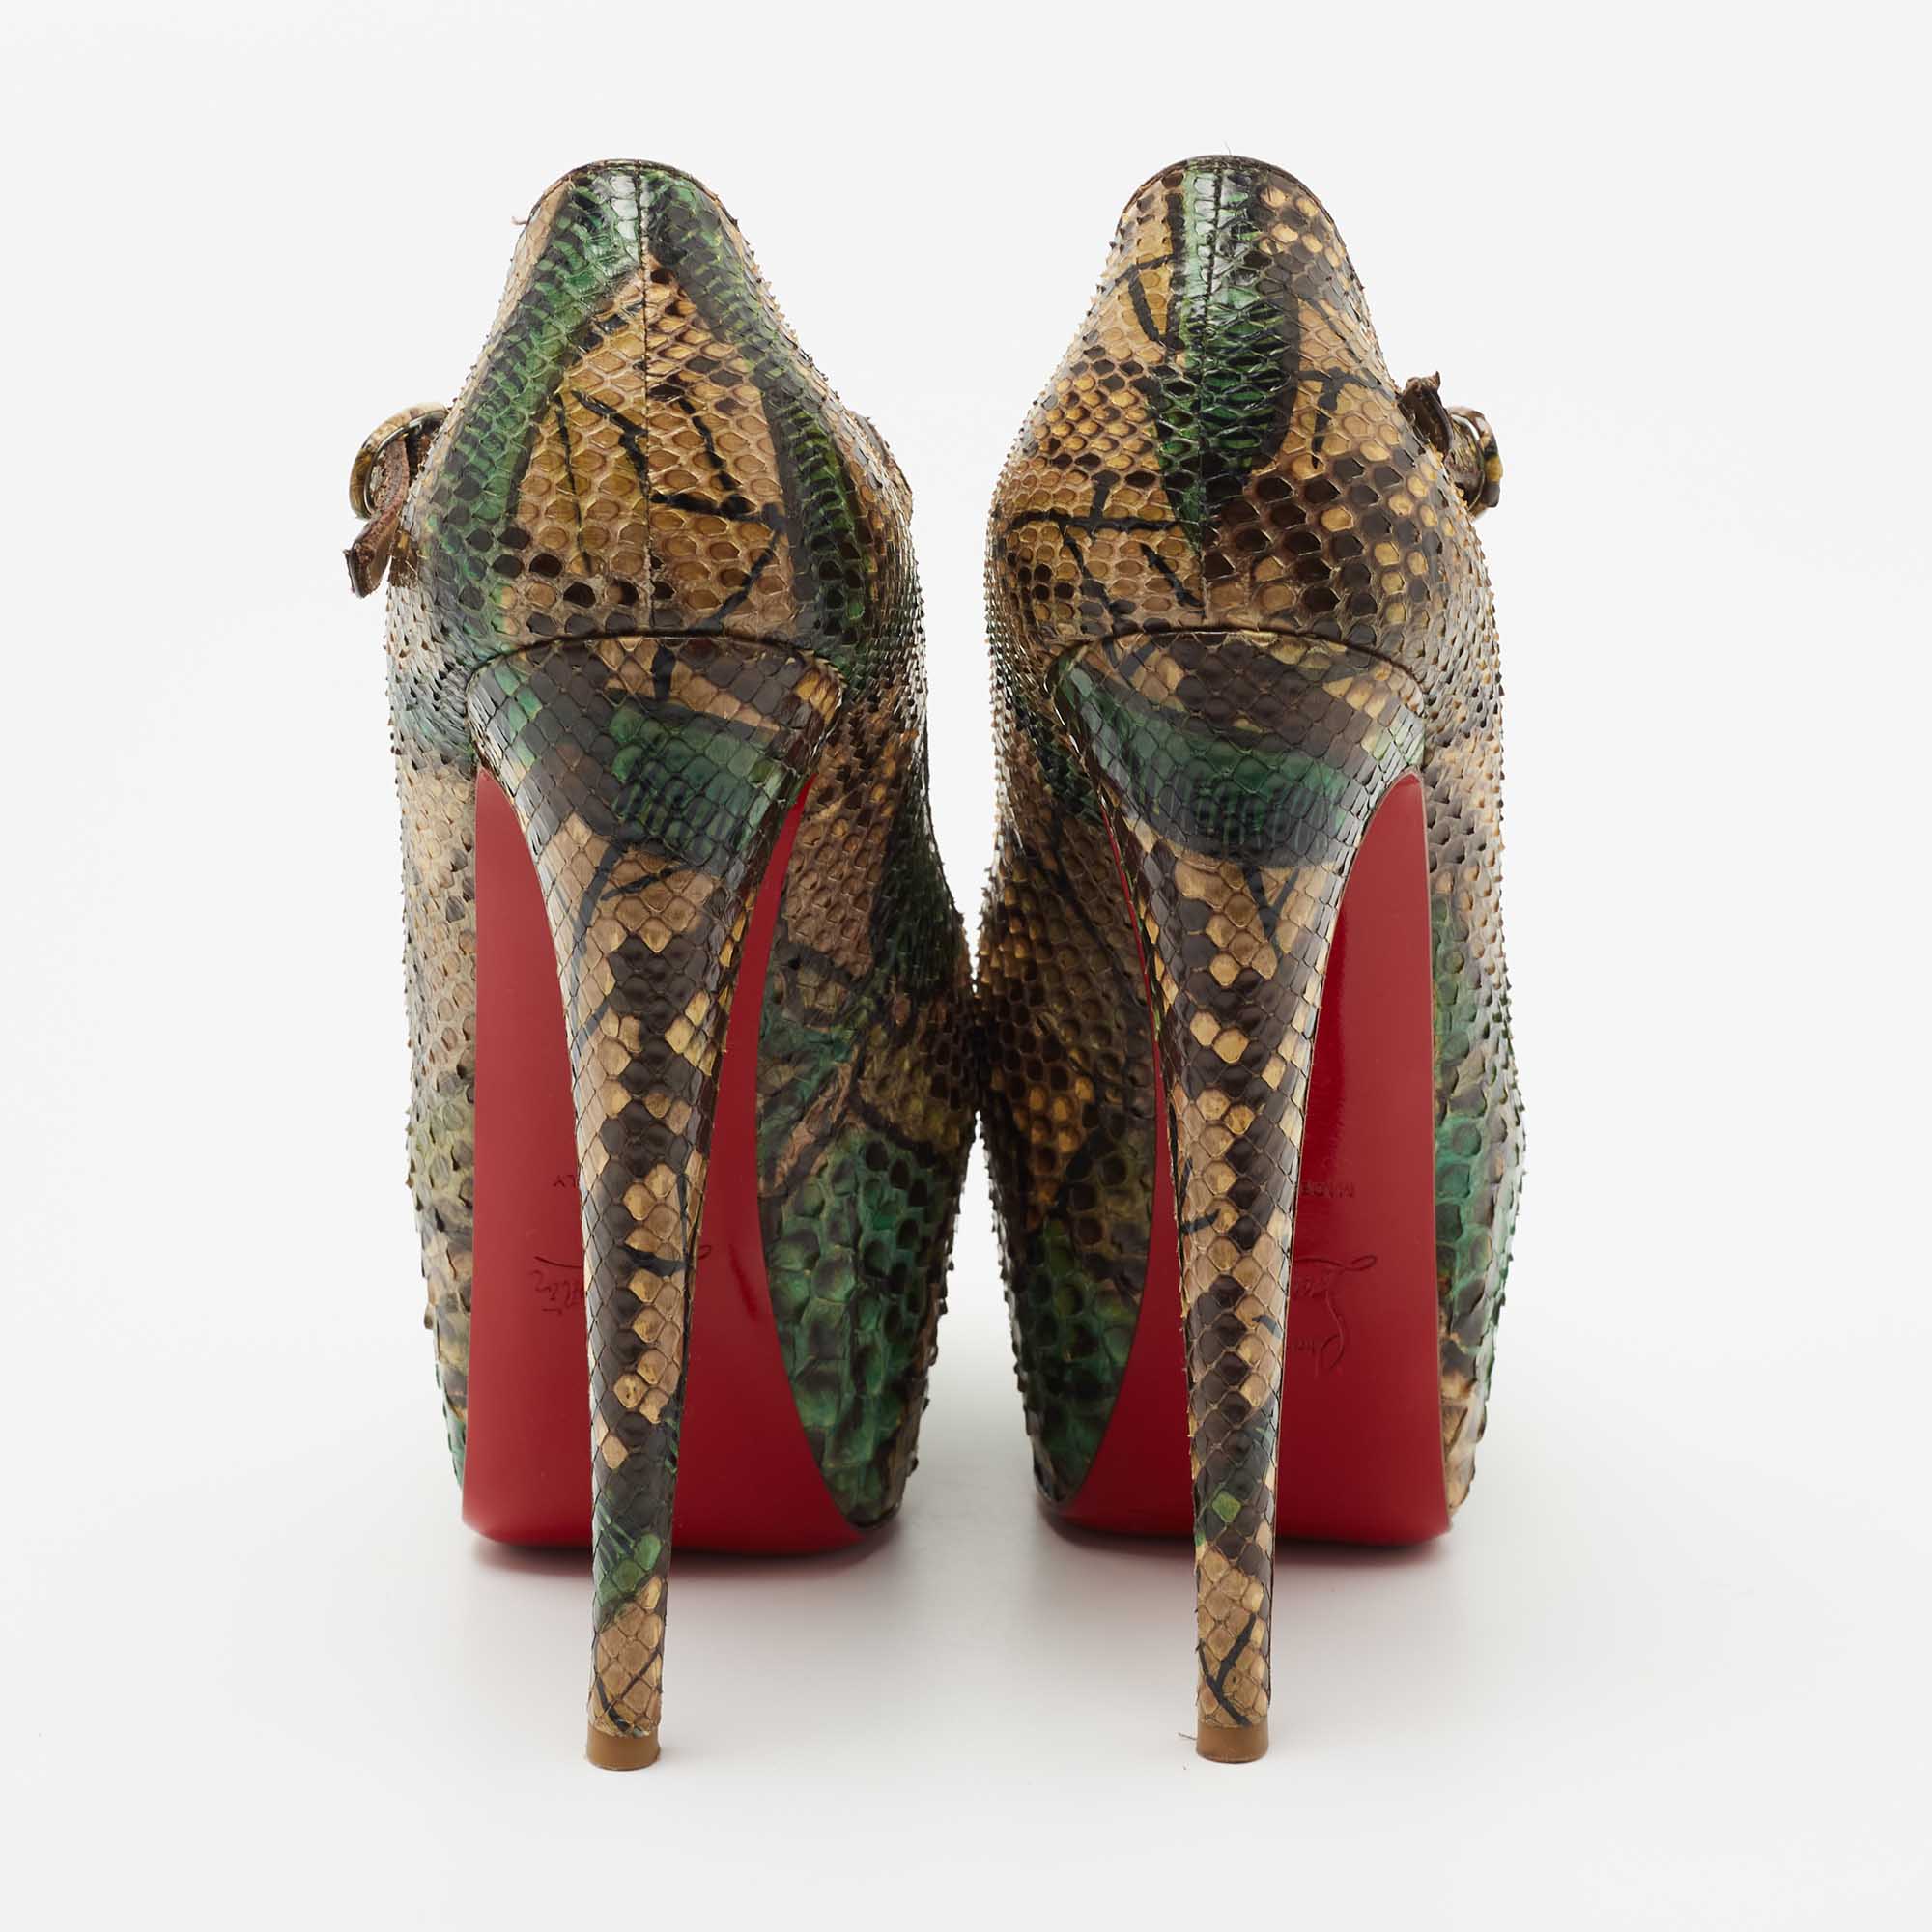 Christian Louboutin Multicolor Python Leather Lady Highness Pumps Size 37